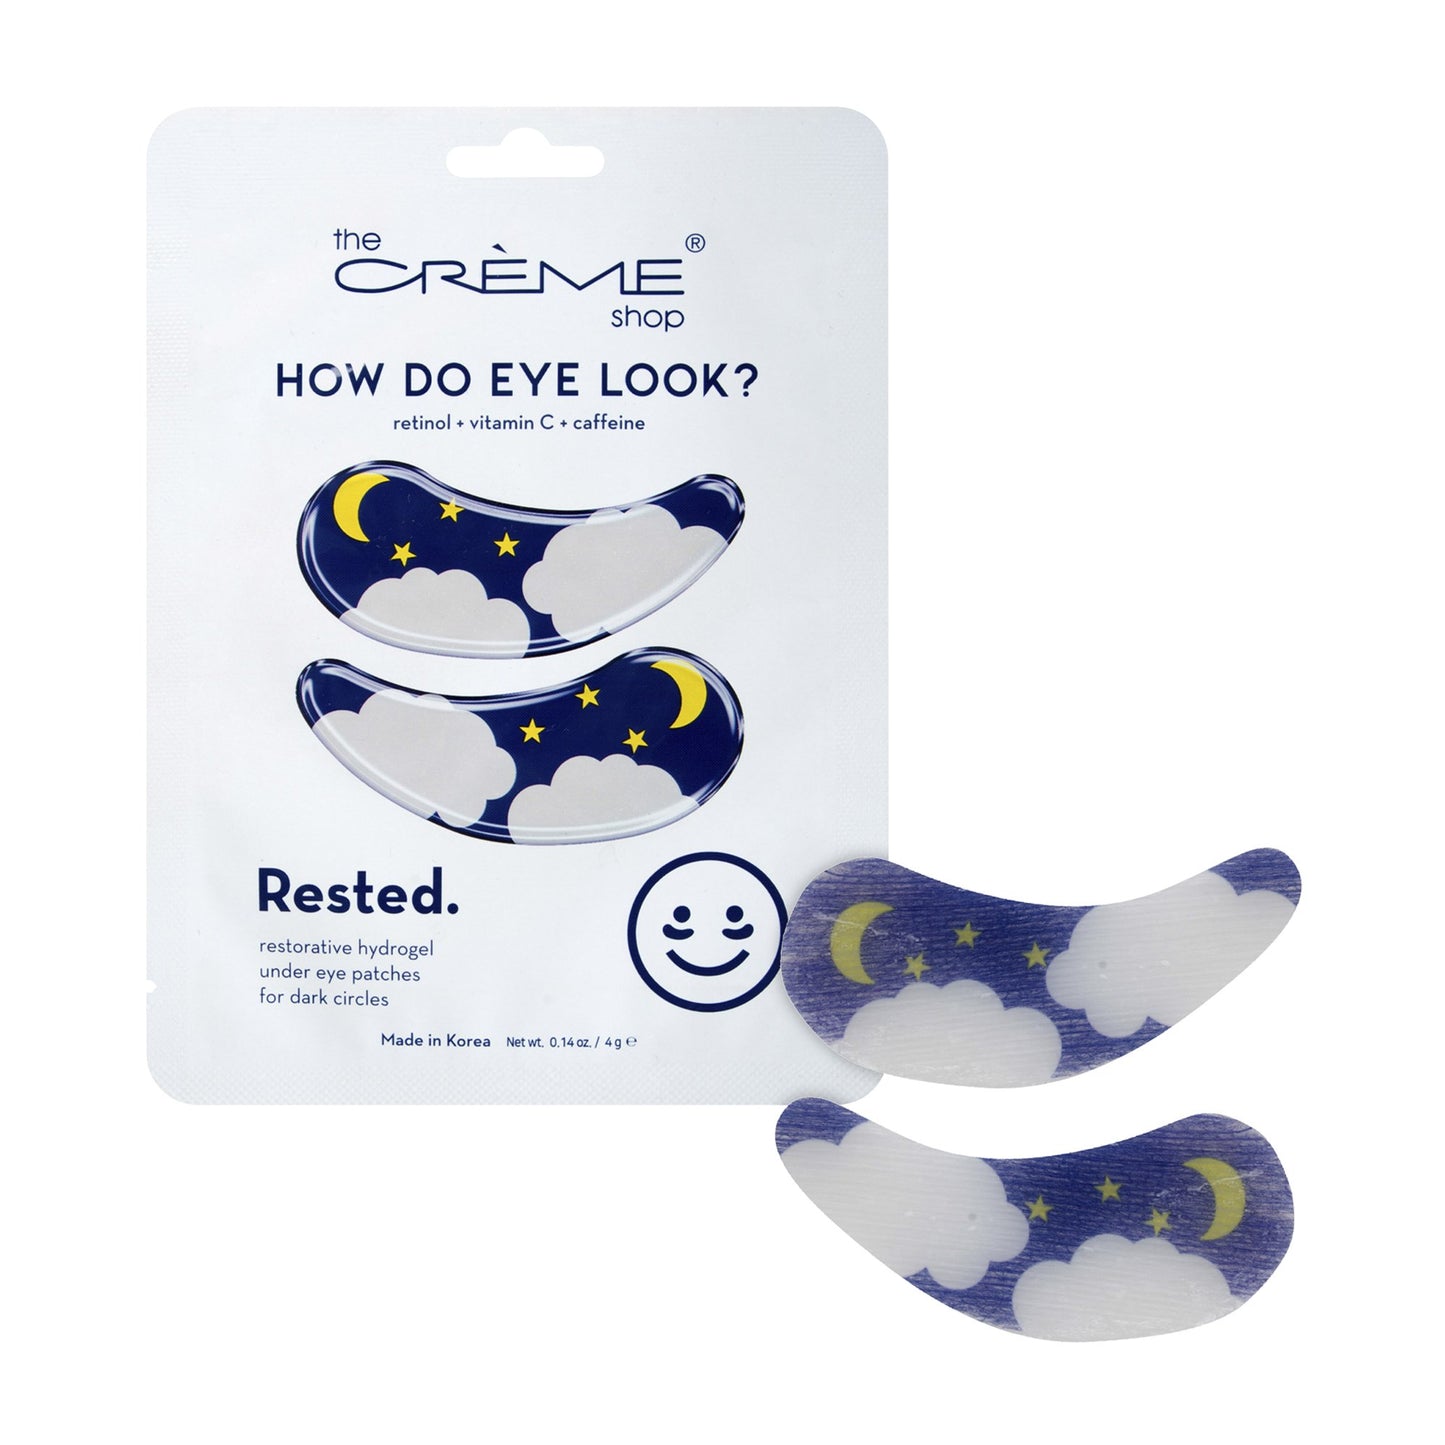 How Do Eye Look? - Rested Under Eye Patches for dark circles - The Crème Shop